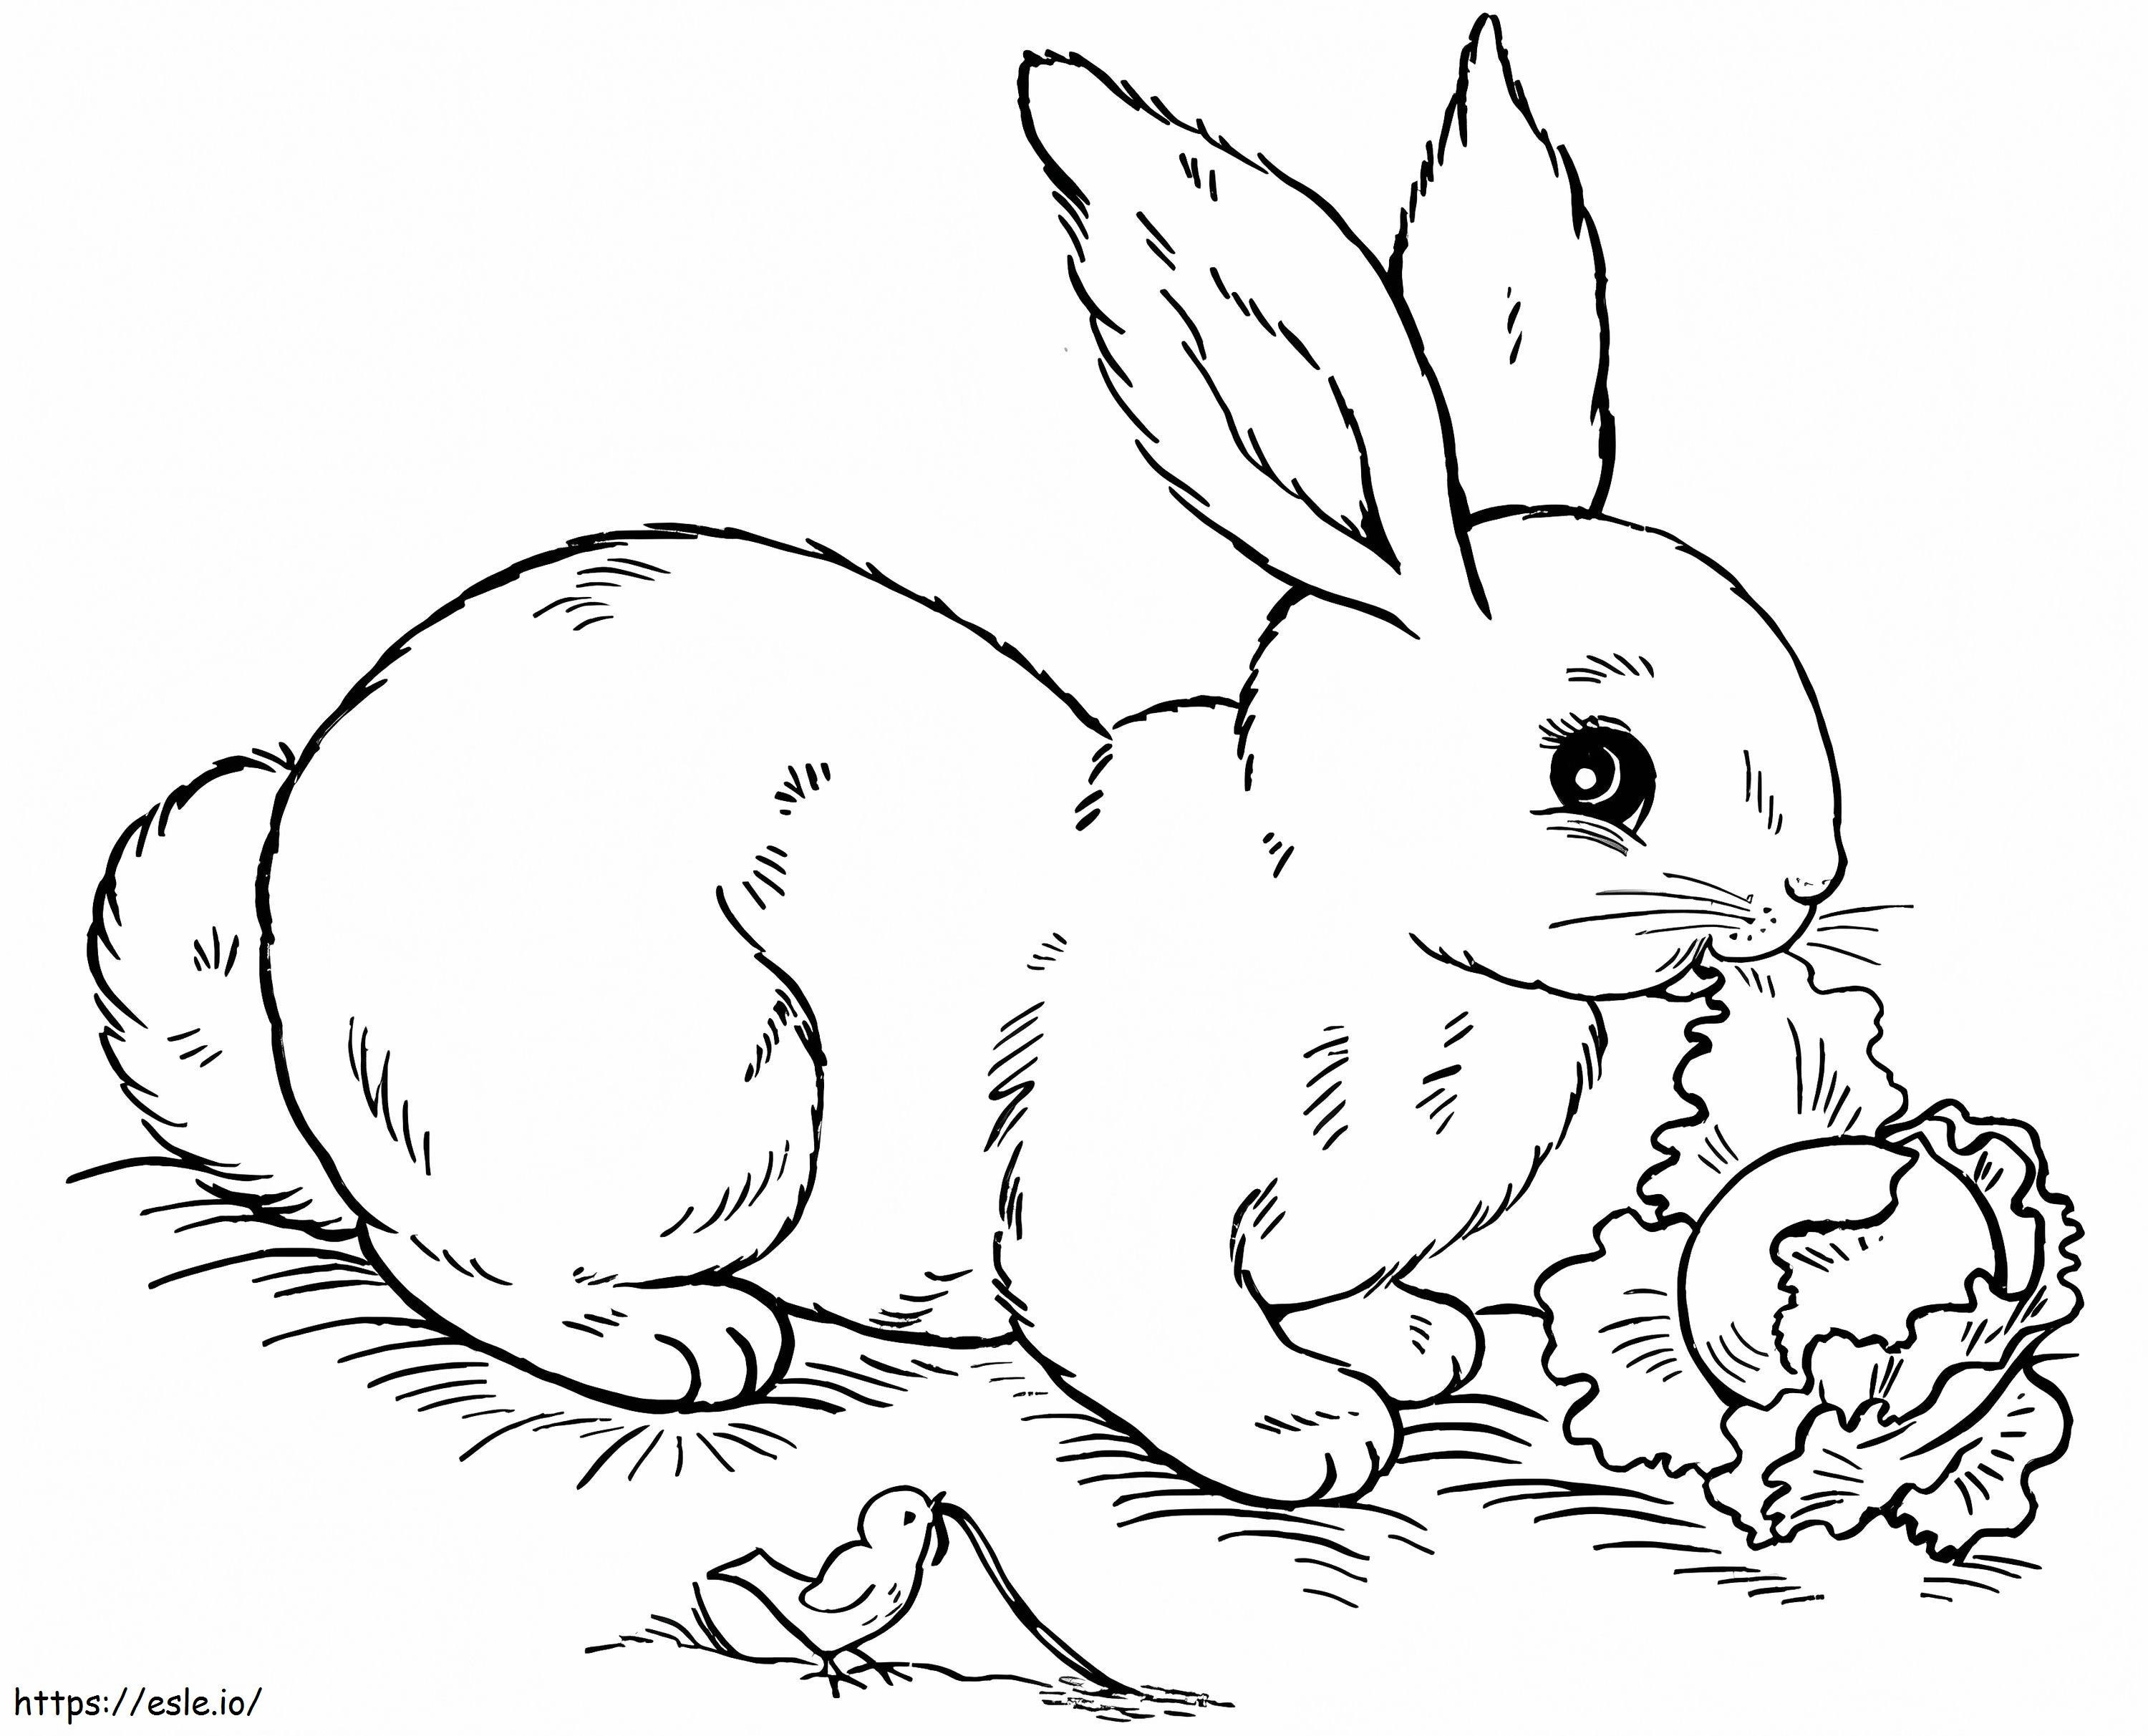 Rabbit Eating Cabbage coloring page